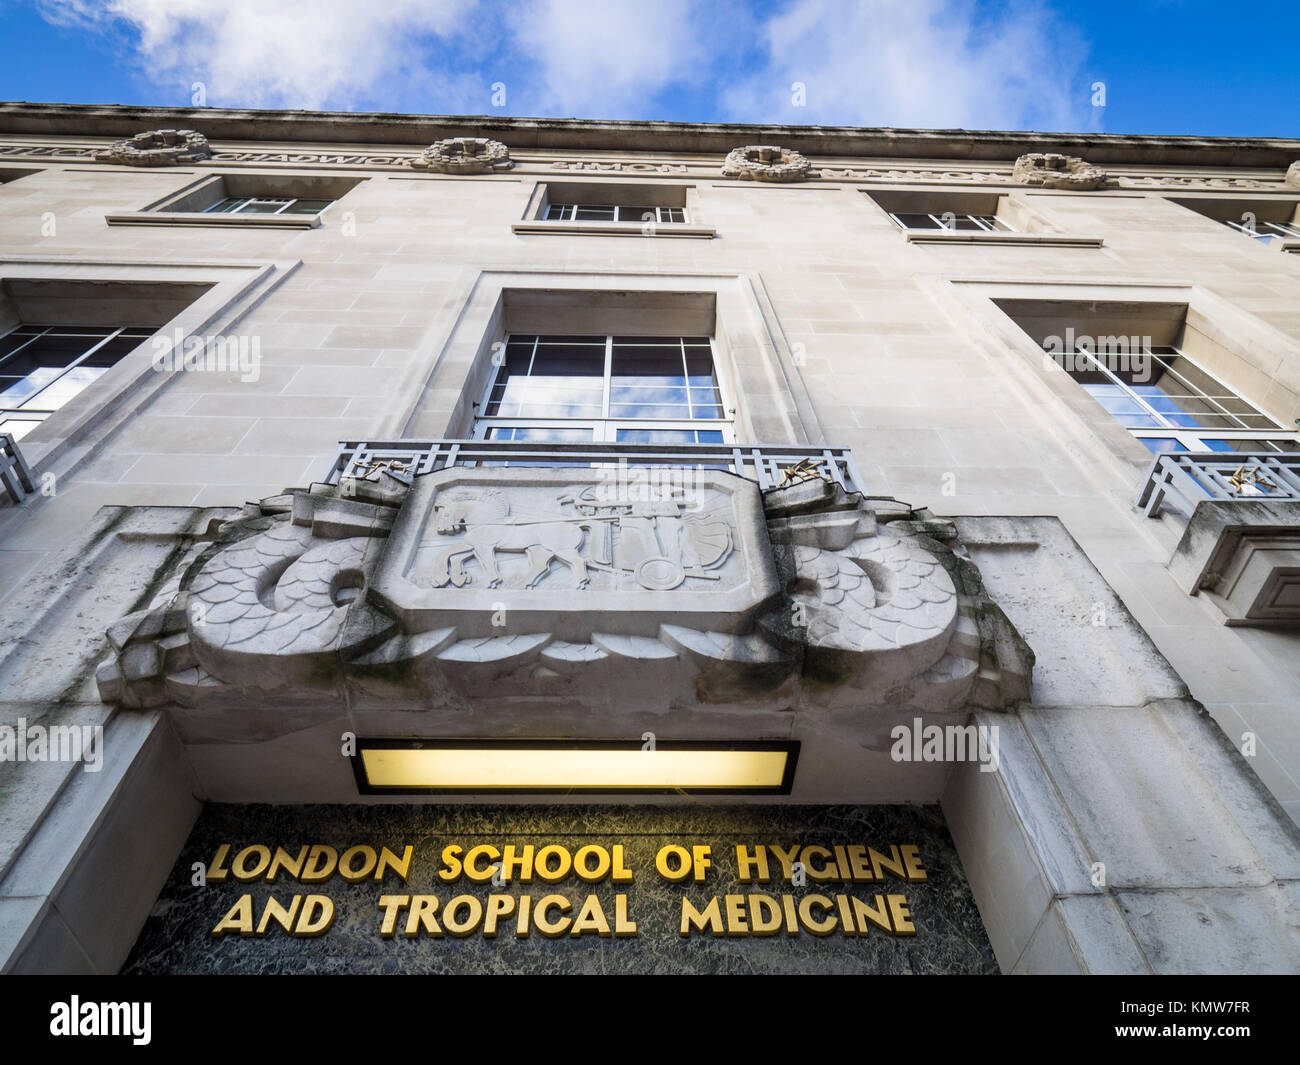 London School of Hygiene & Tropical Medicine, Bloomsbury, London. The art deco style building opened in 1929, architects Morley Horder and Verner Rees Stock Photo